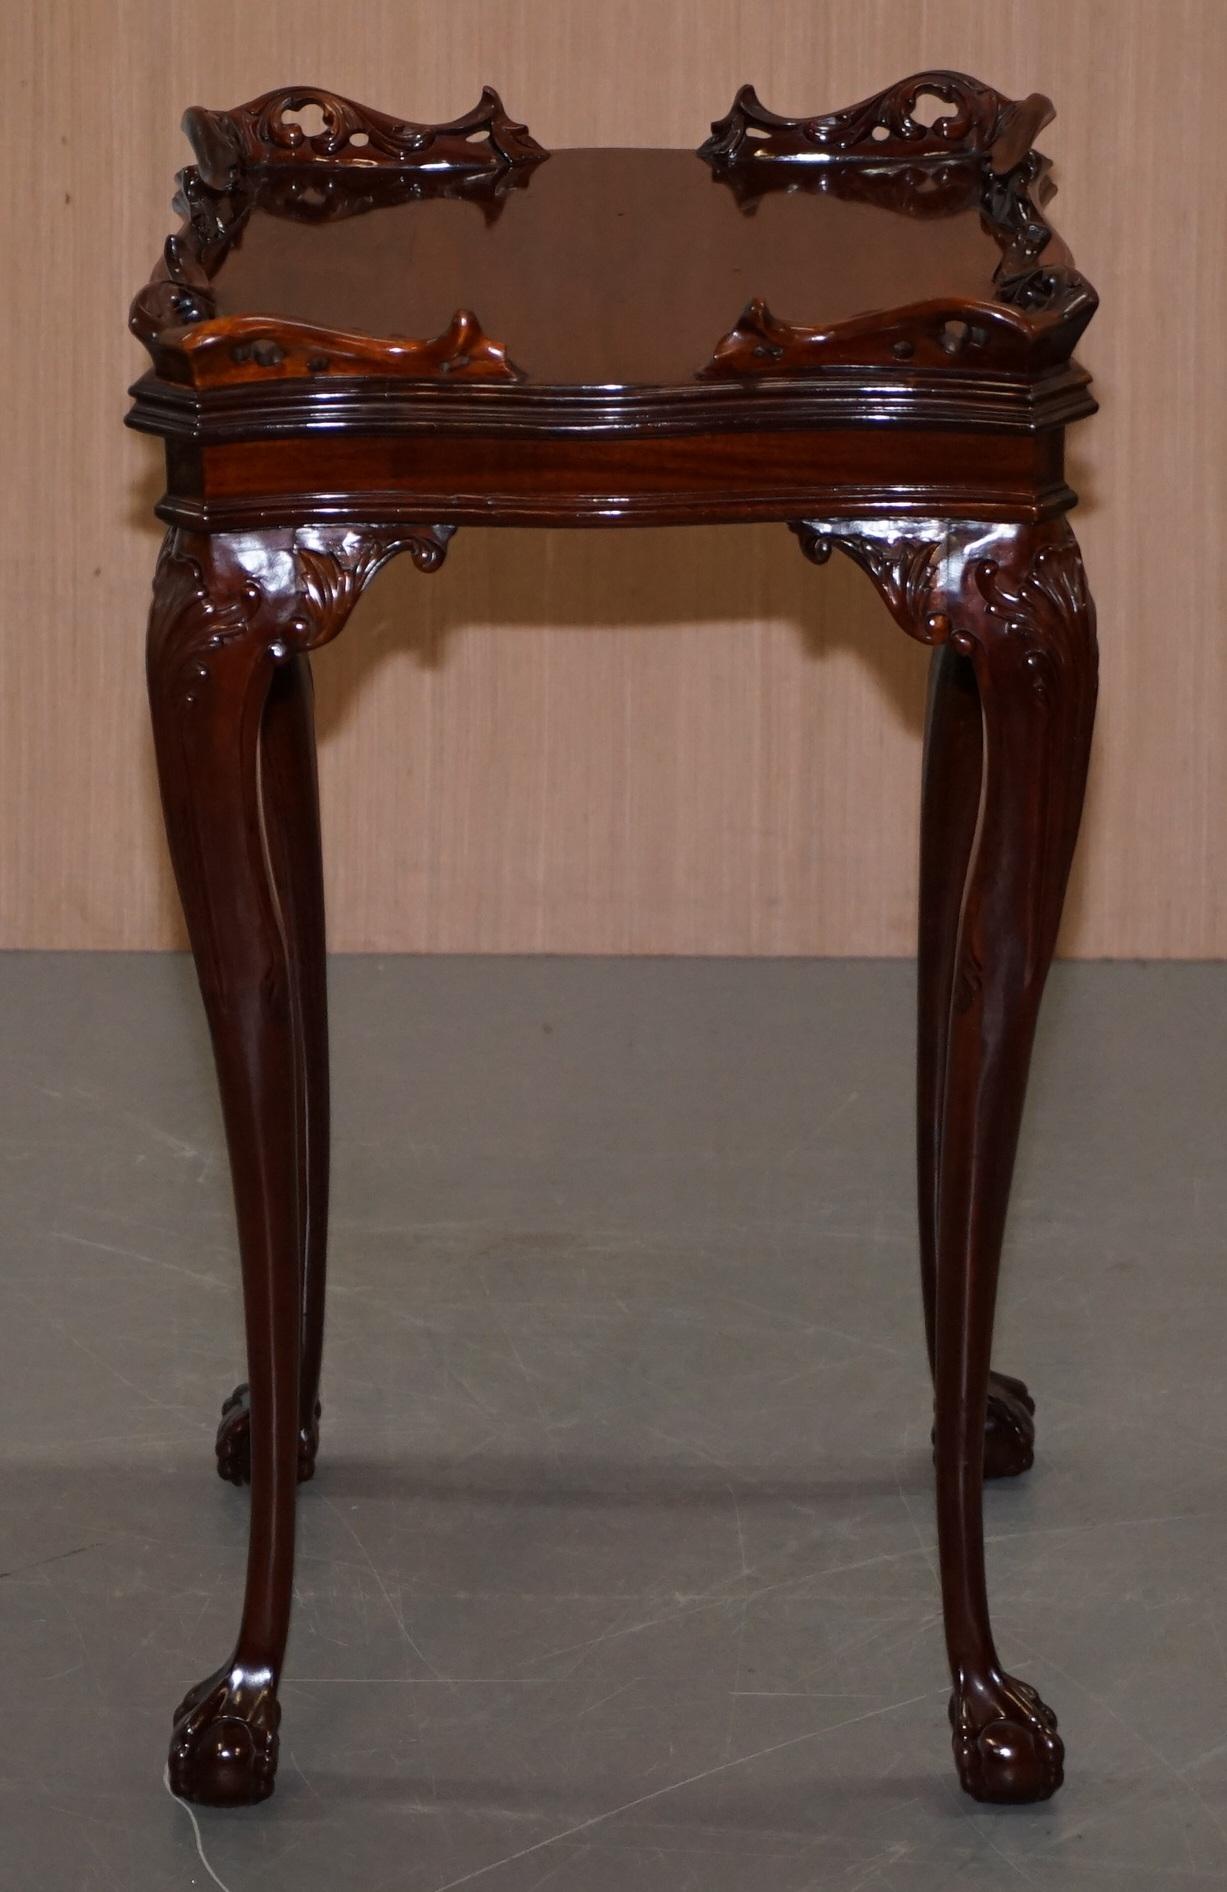 We are delighted to offer for sale this lovely solid mahogany with claw and ball feet jardinière stand

A good looking and decorative piece in near perfect condition, ideally suited to seat a bust or statue of some sort

It has been cleaned